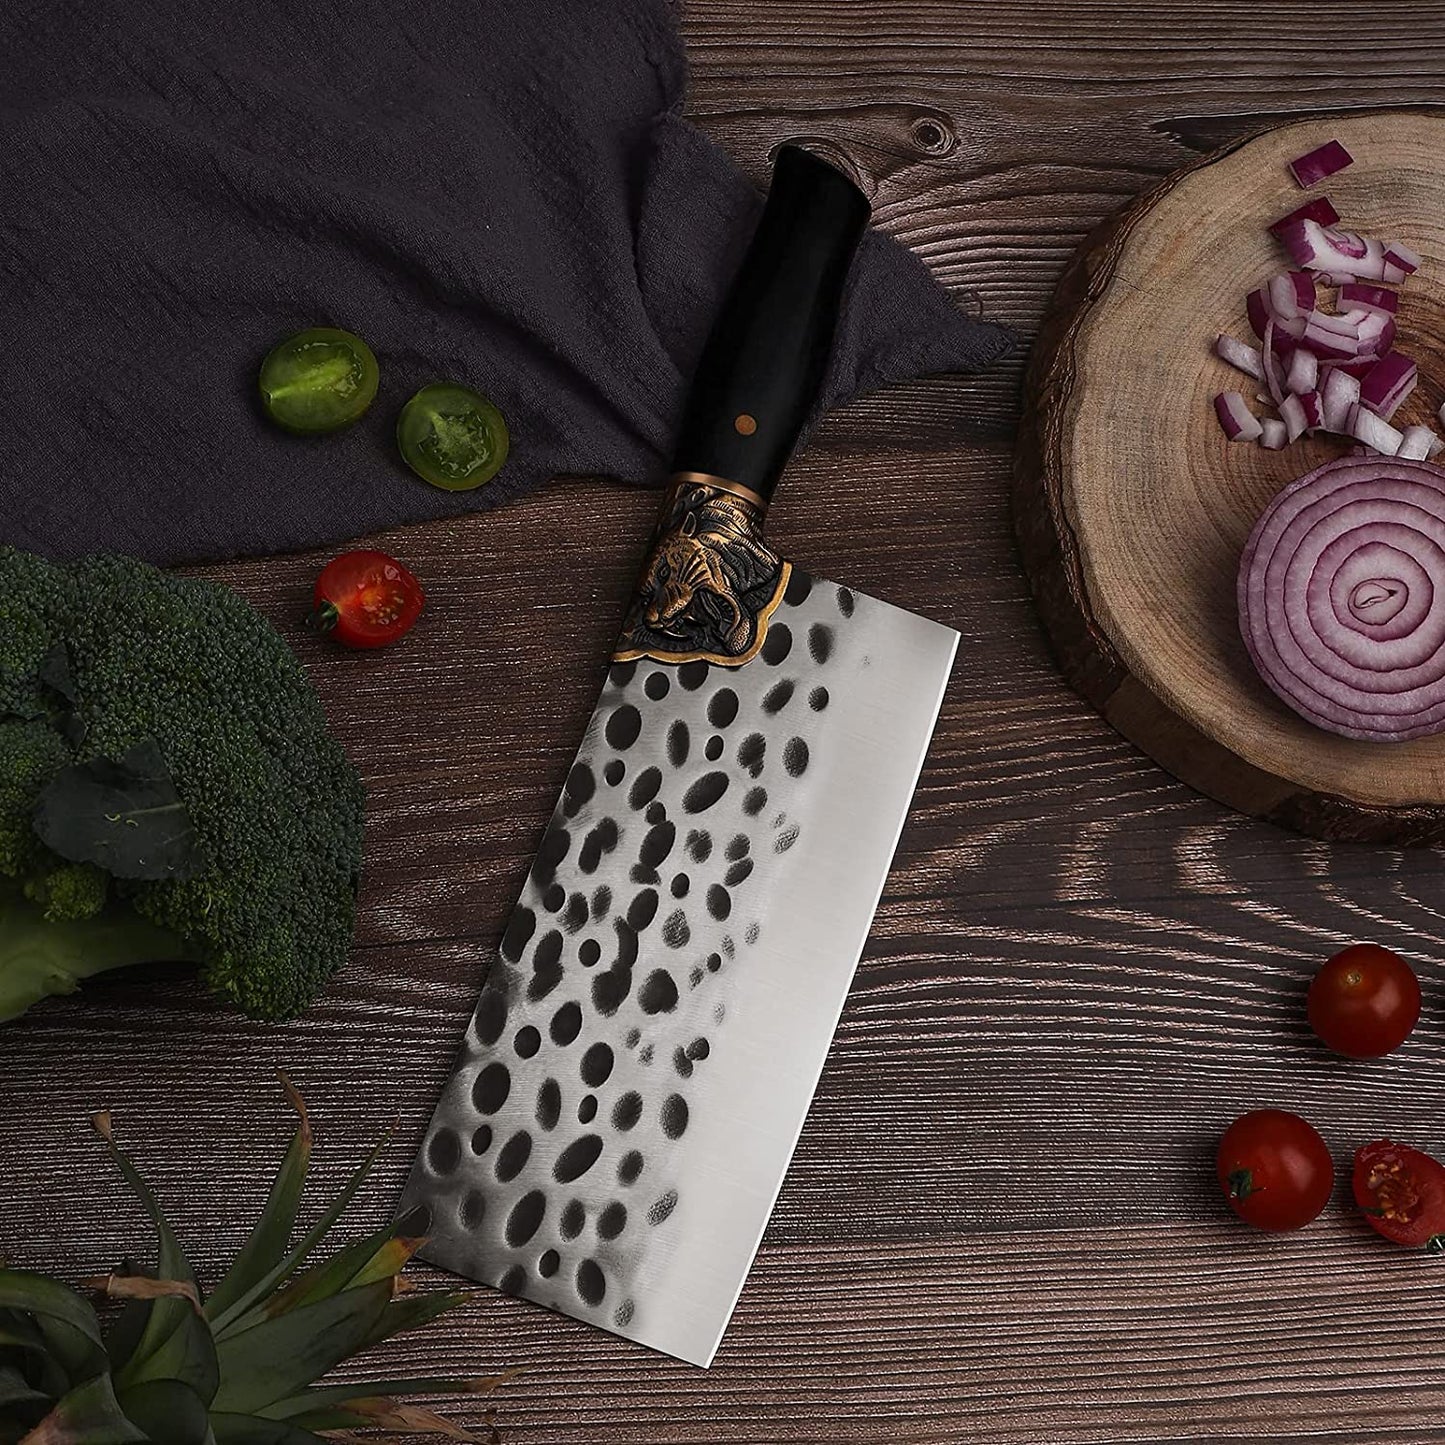 Professional Meat Vegetable Cleaver Hand Forged Butcher knife